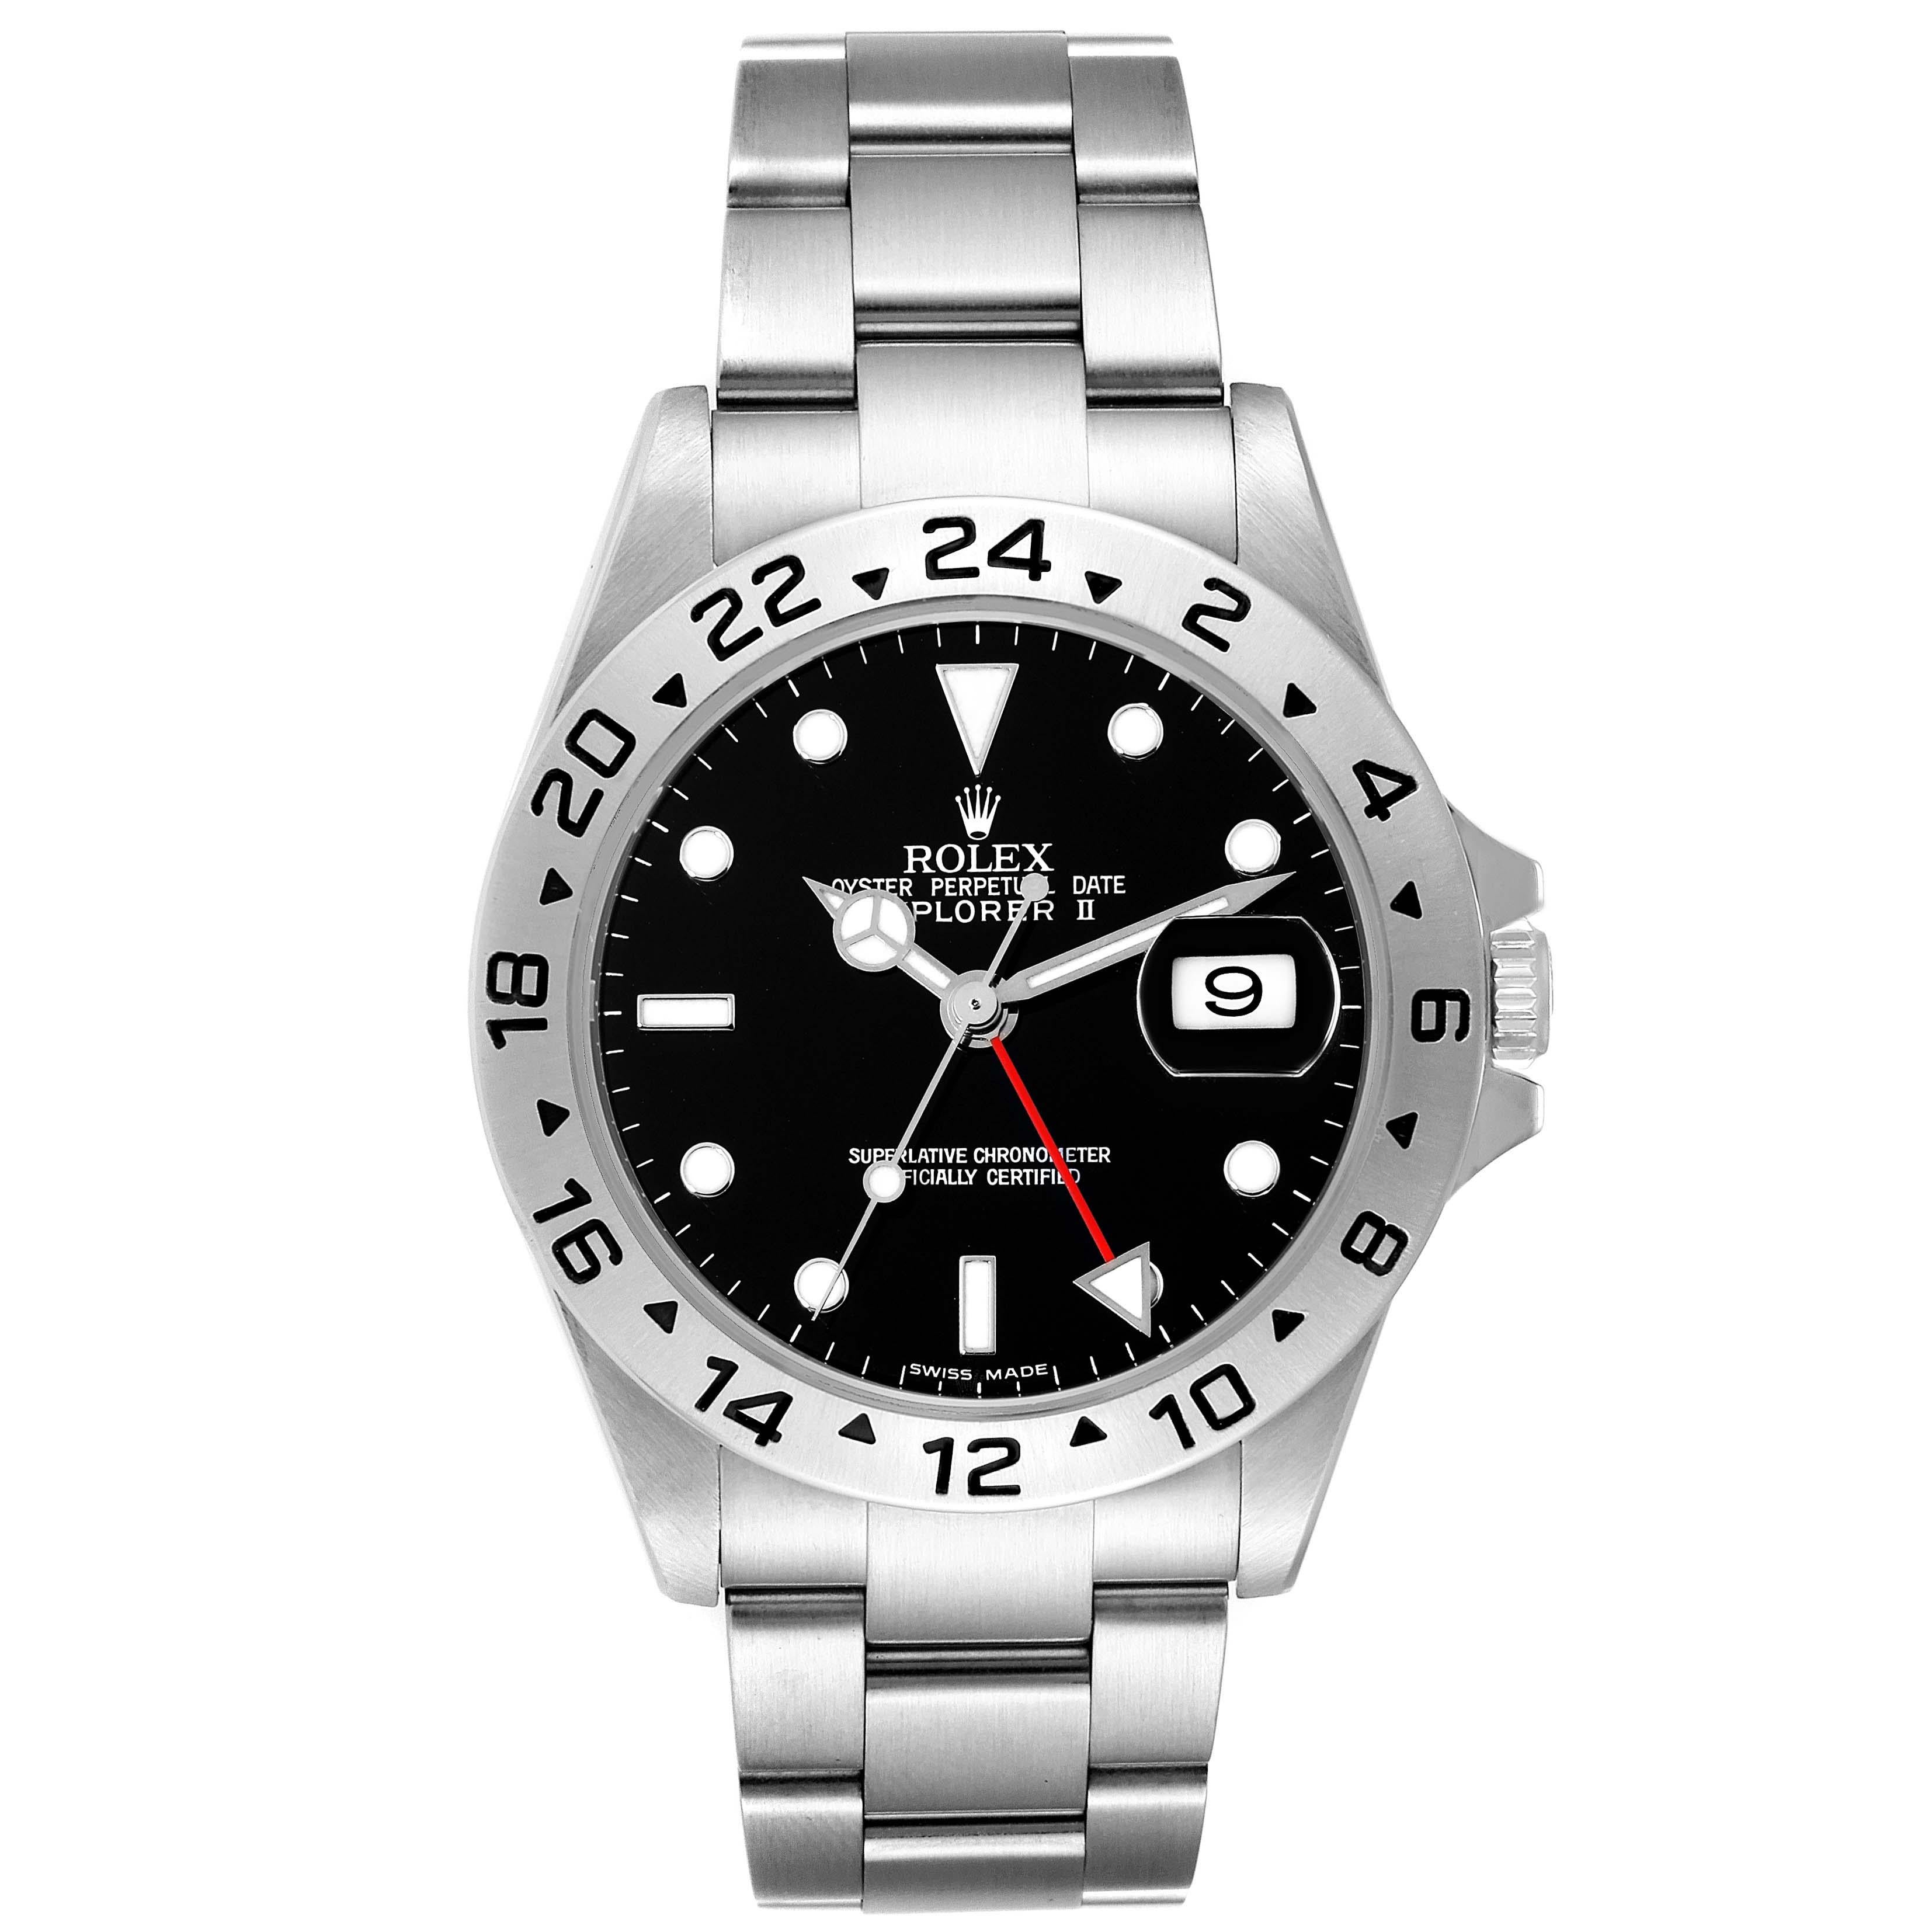 Rolex Explorer II Black Dial Steel Mens Watch 16570. Officially certified chronometer automatic self-winding movement. Stainless steel case 40 mm in diameter. Rolex logo on the crown. Stainless steel bezel with 24-hour scale. Scratch resistant